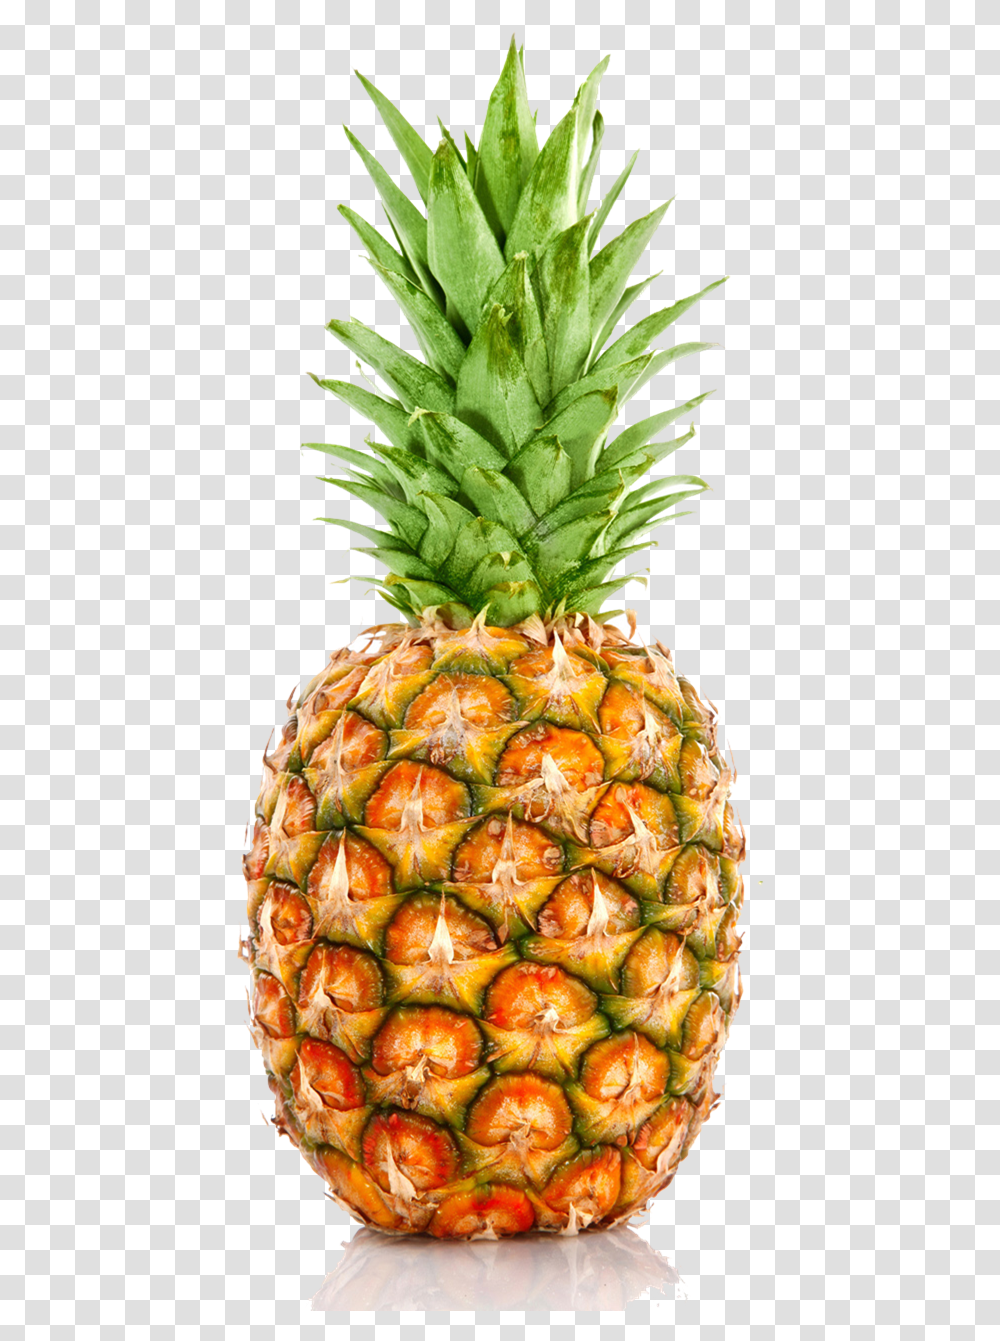 Download Hd Pineapple Background Individual Pictures Of Fruits And Vegetables, Plant, Food Transparent Png